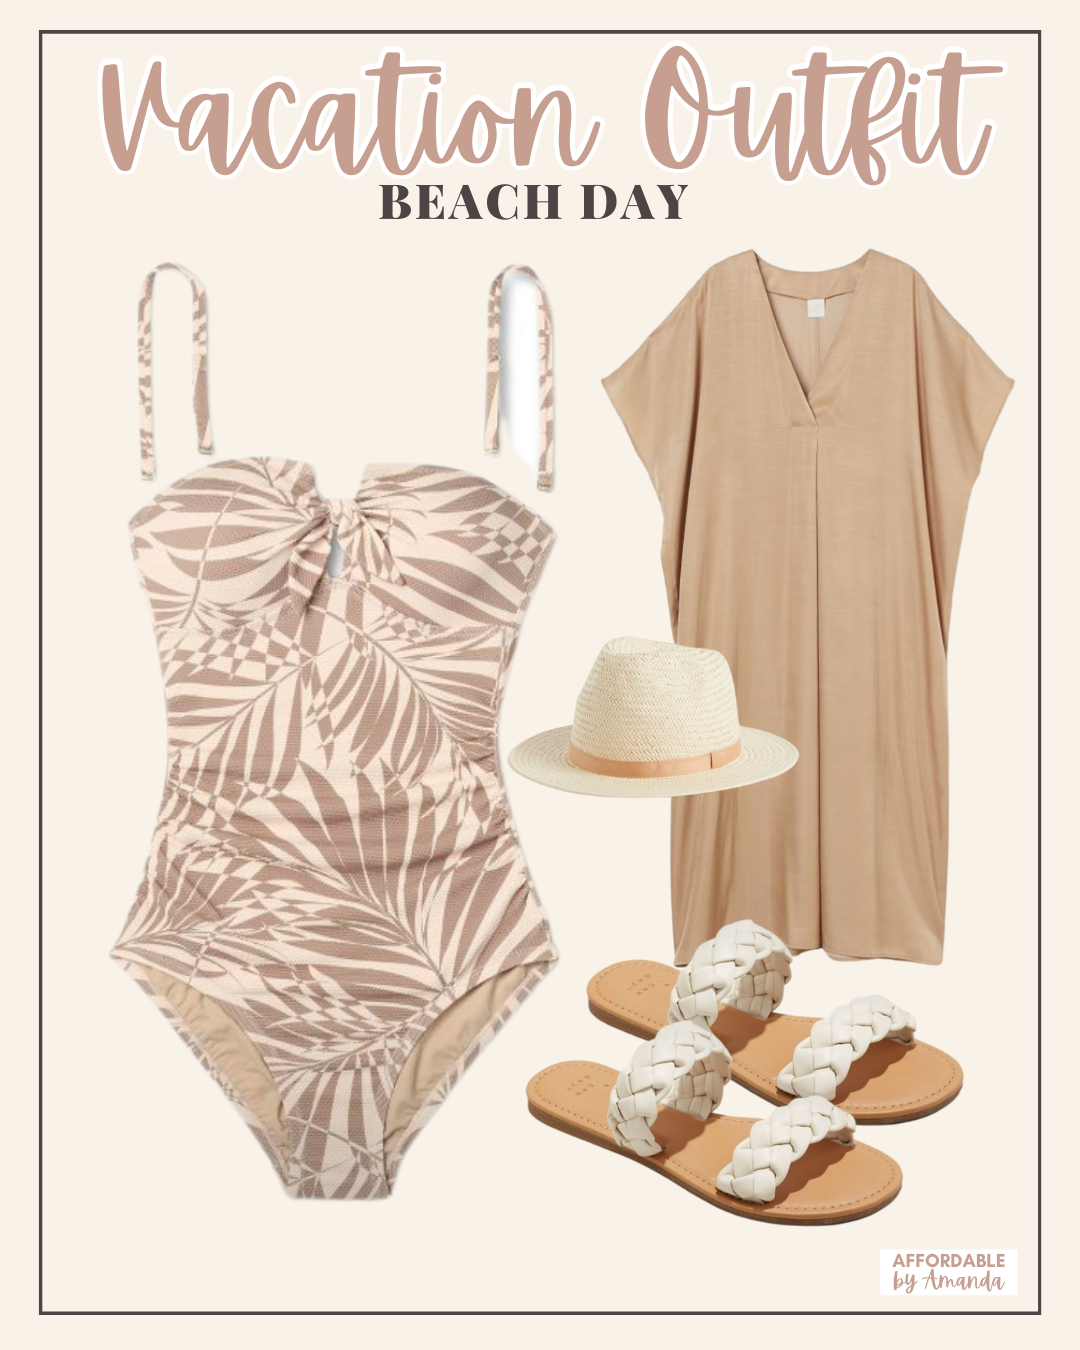 10 Vacation Outfit Ideas 2023 - Beach Vacation Outfits 2023. Summer Vacation Outfits 2023. Tropical Vacation Outfit Ideas.